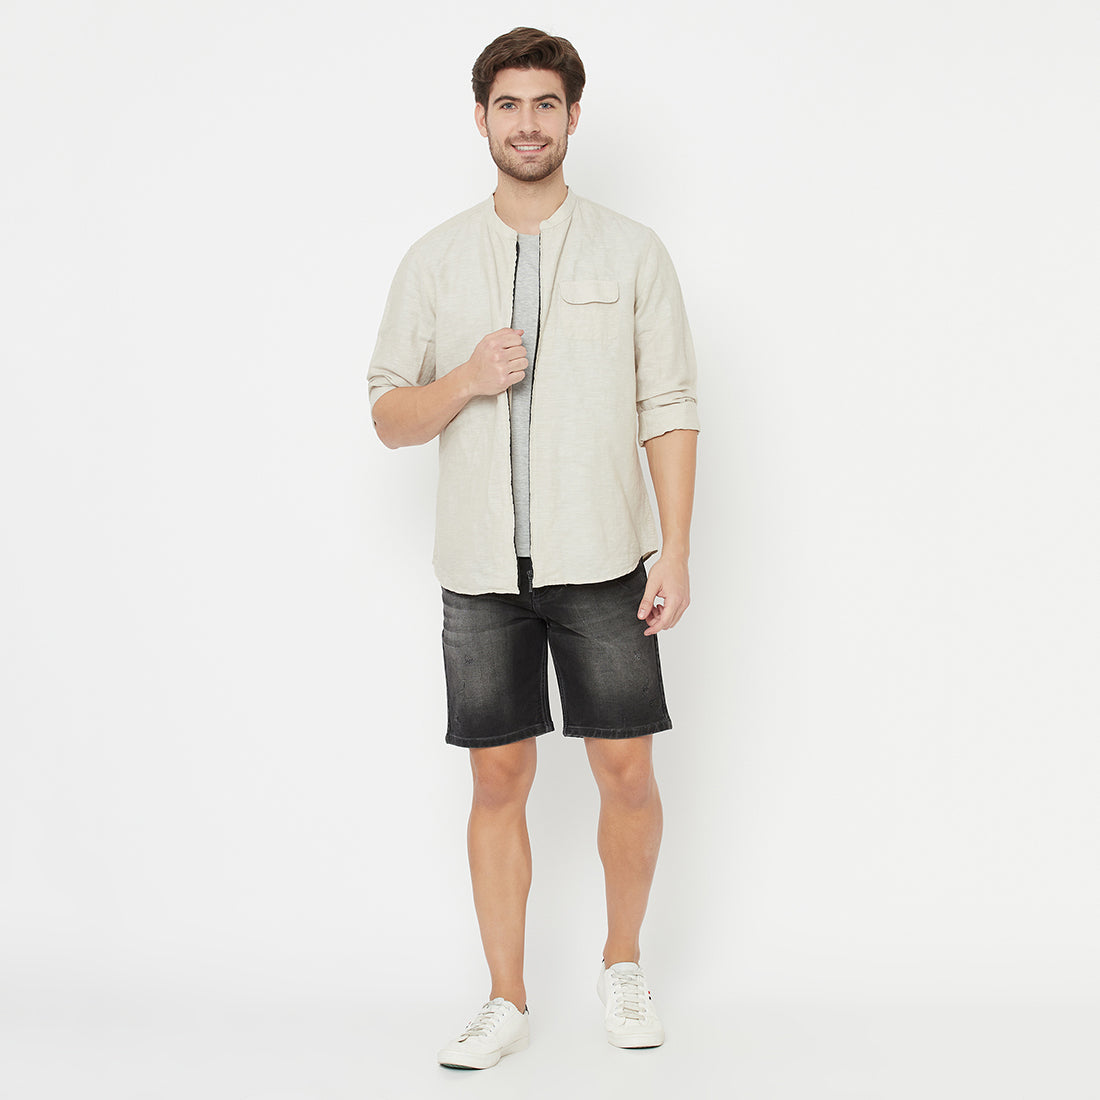 The Alpha Shorts <br> in Washed Black